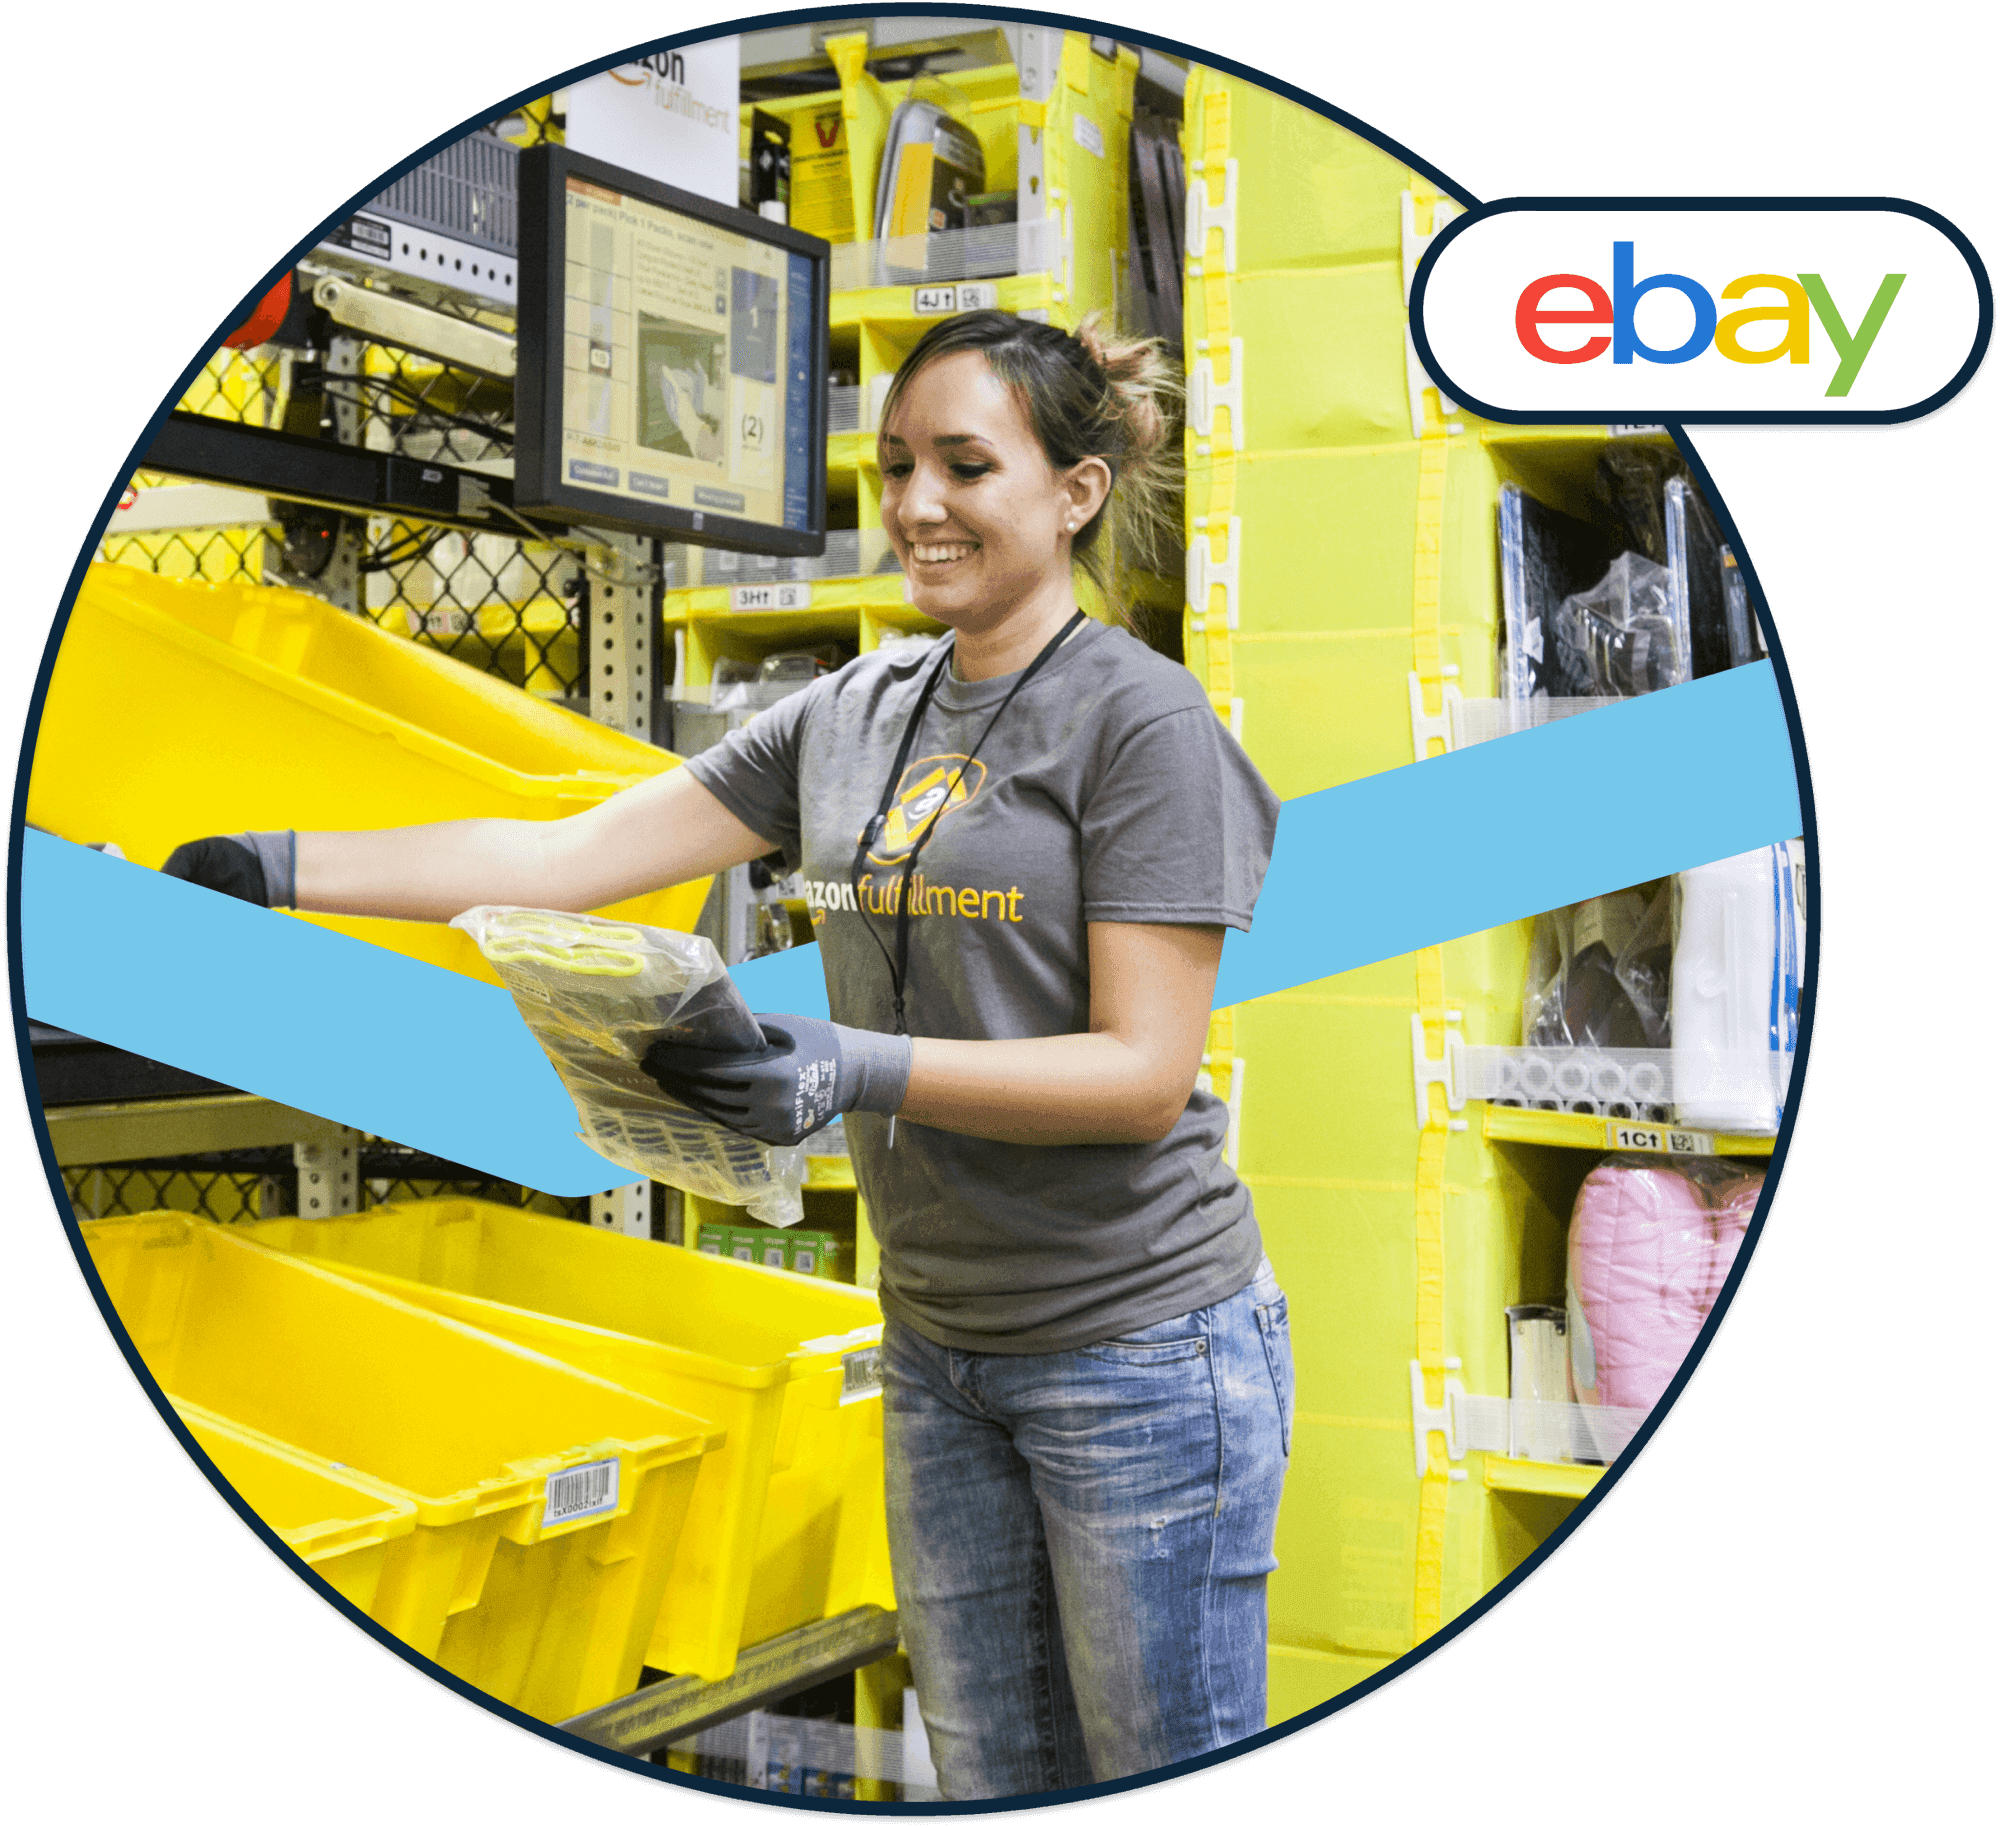 Shipping eBay orders with FBA